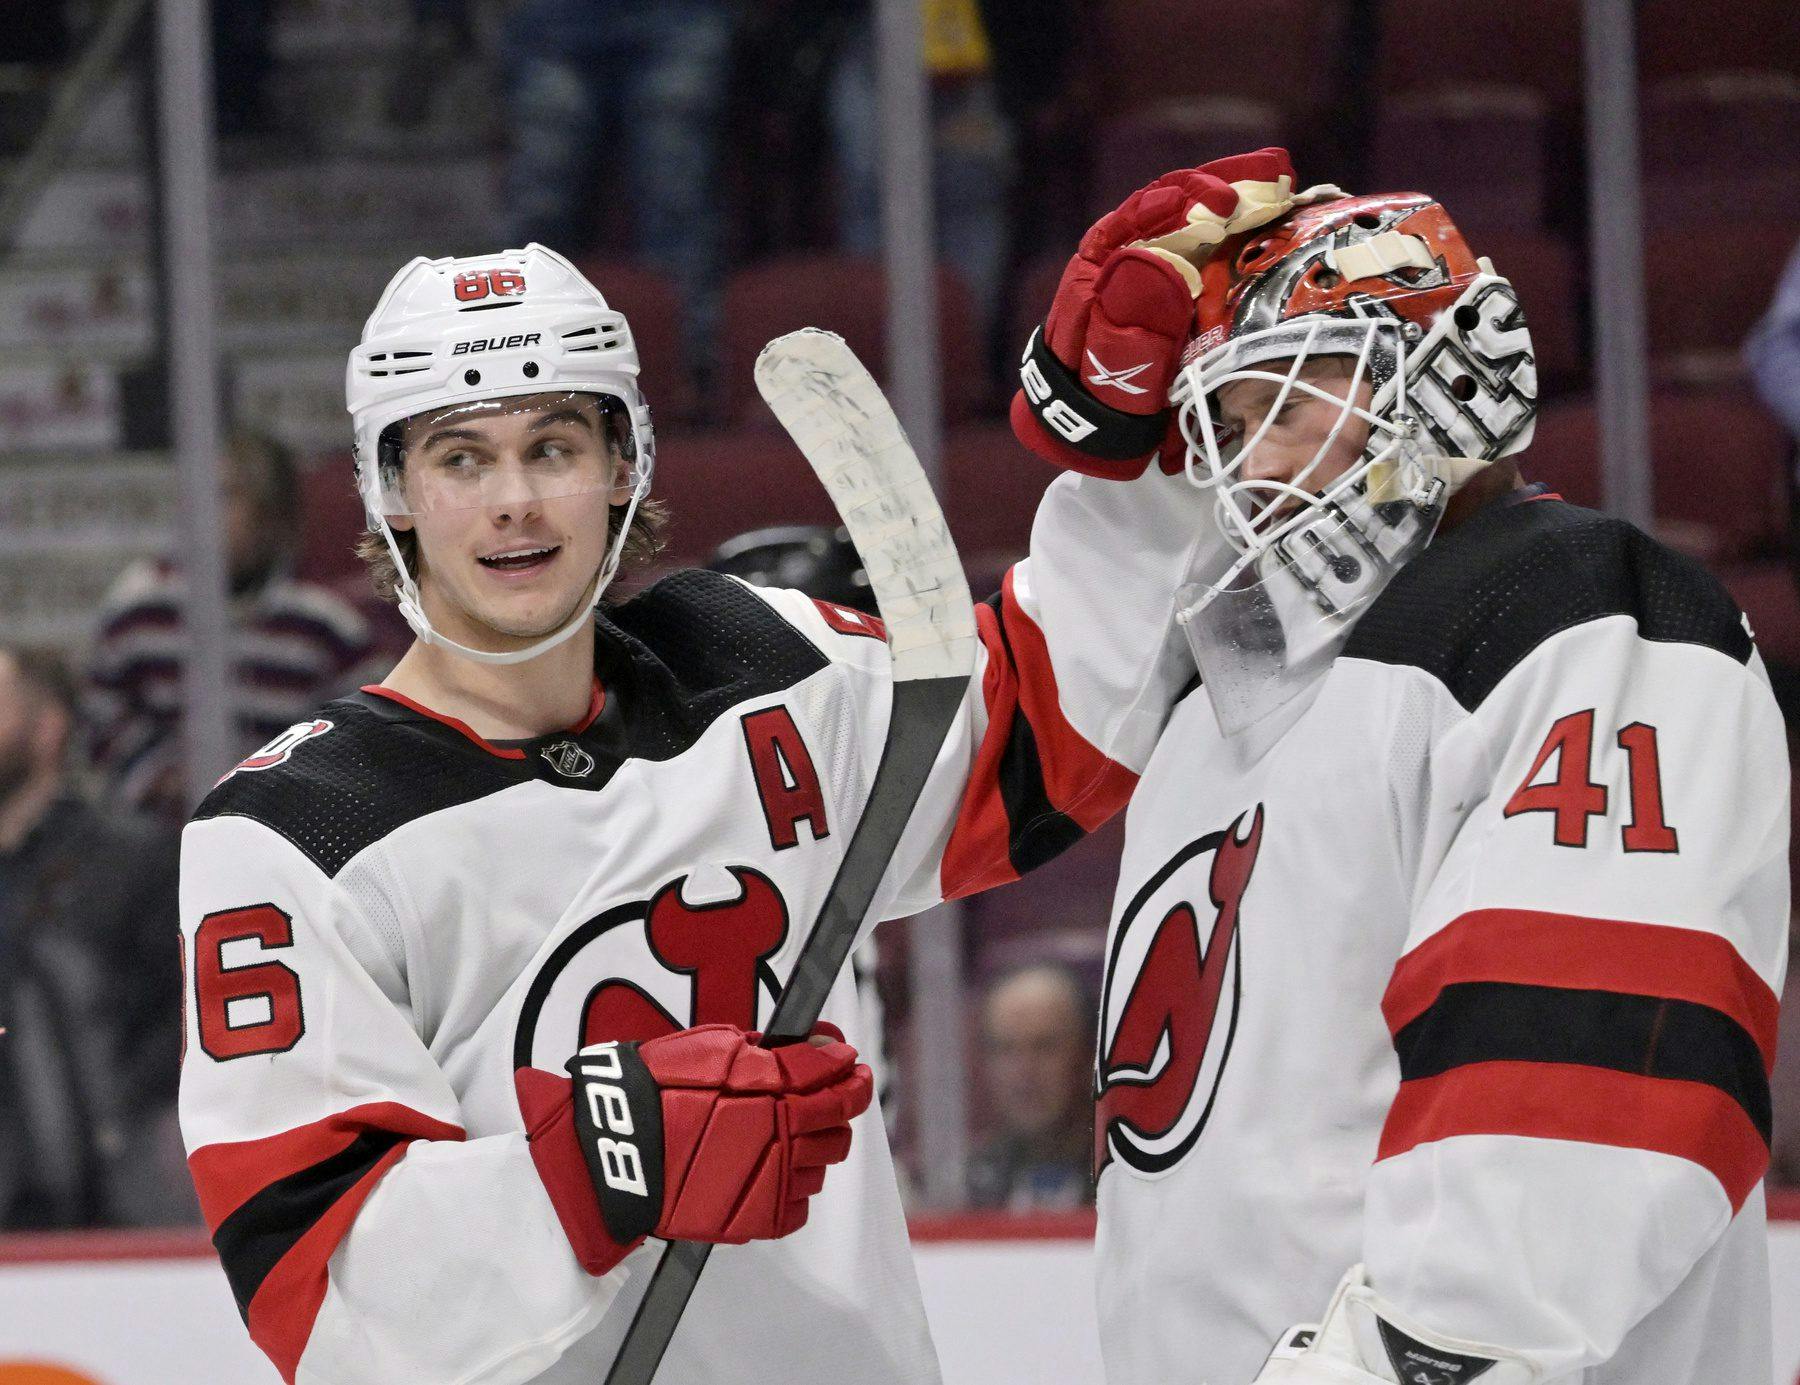 Daily Faceoff Live: Bryce Salvador weighs in on the Devils’ winning streak